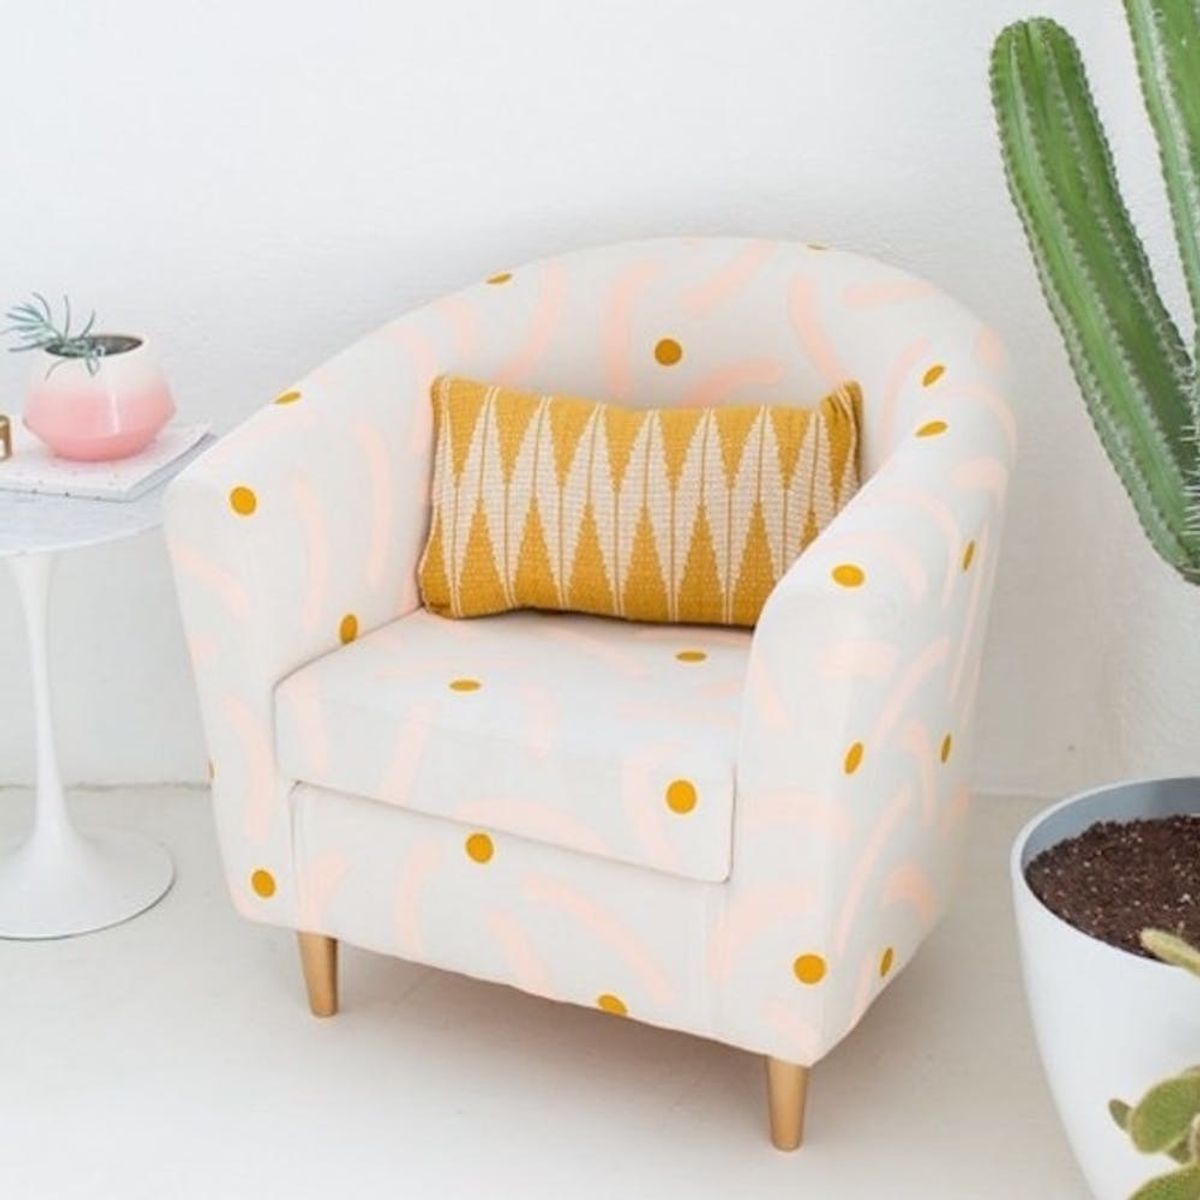 15 IKEA Hacks to Spruce Up Your Home for Summer